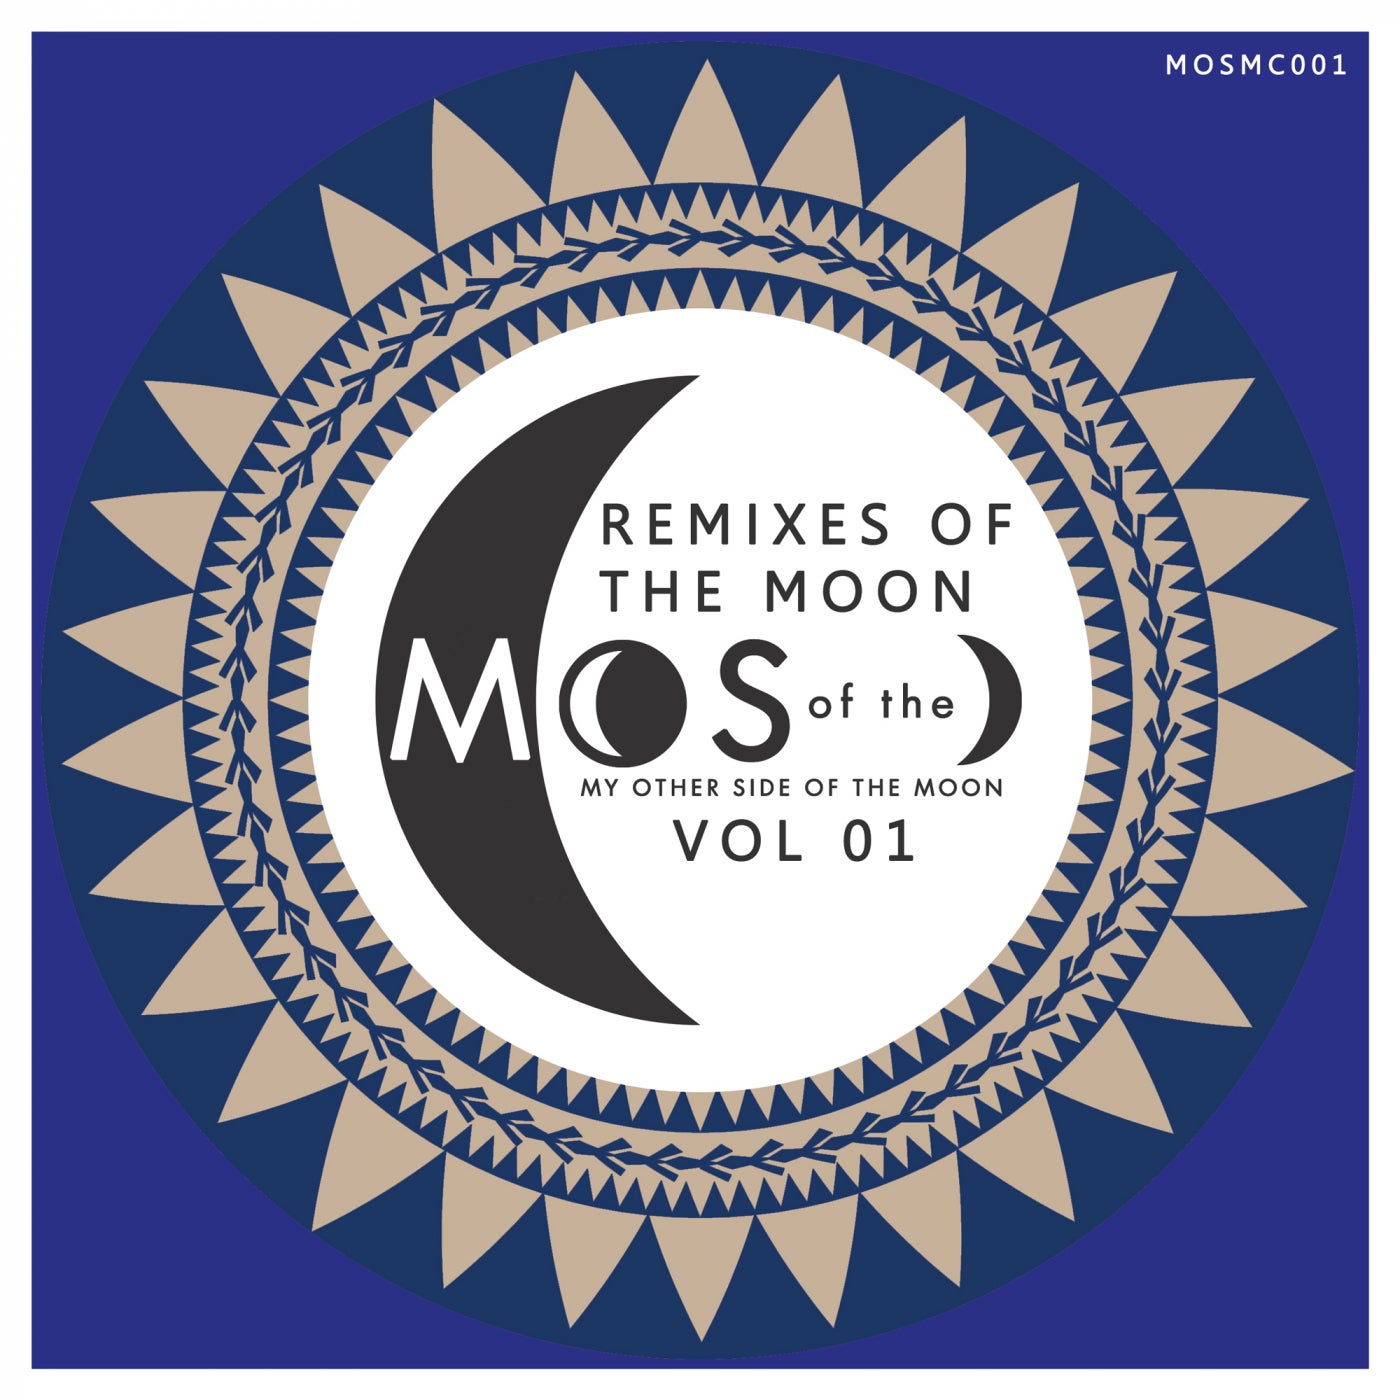 Download Remixes of The Moon Vol 01 on Electrobuzz